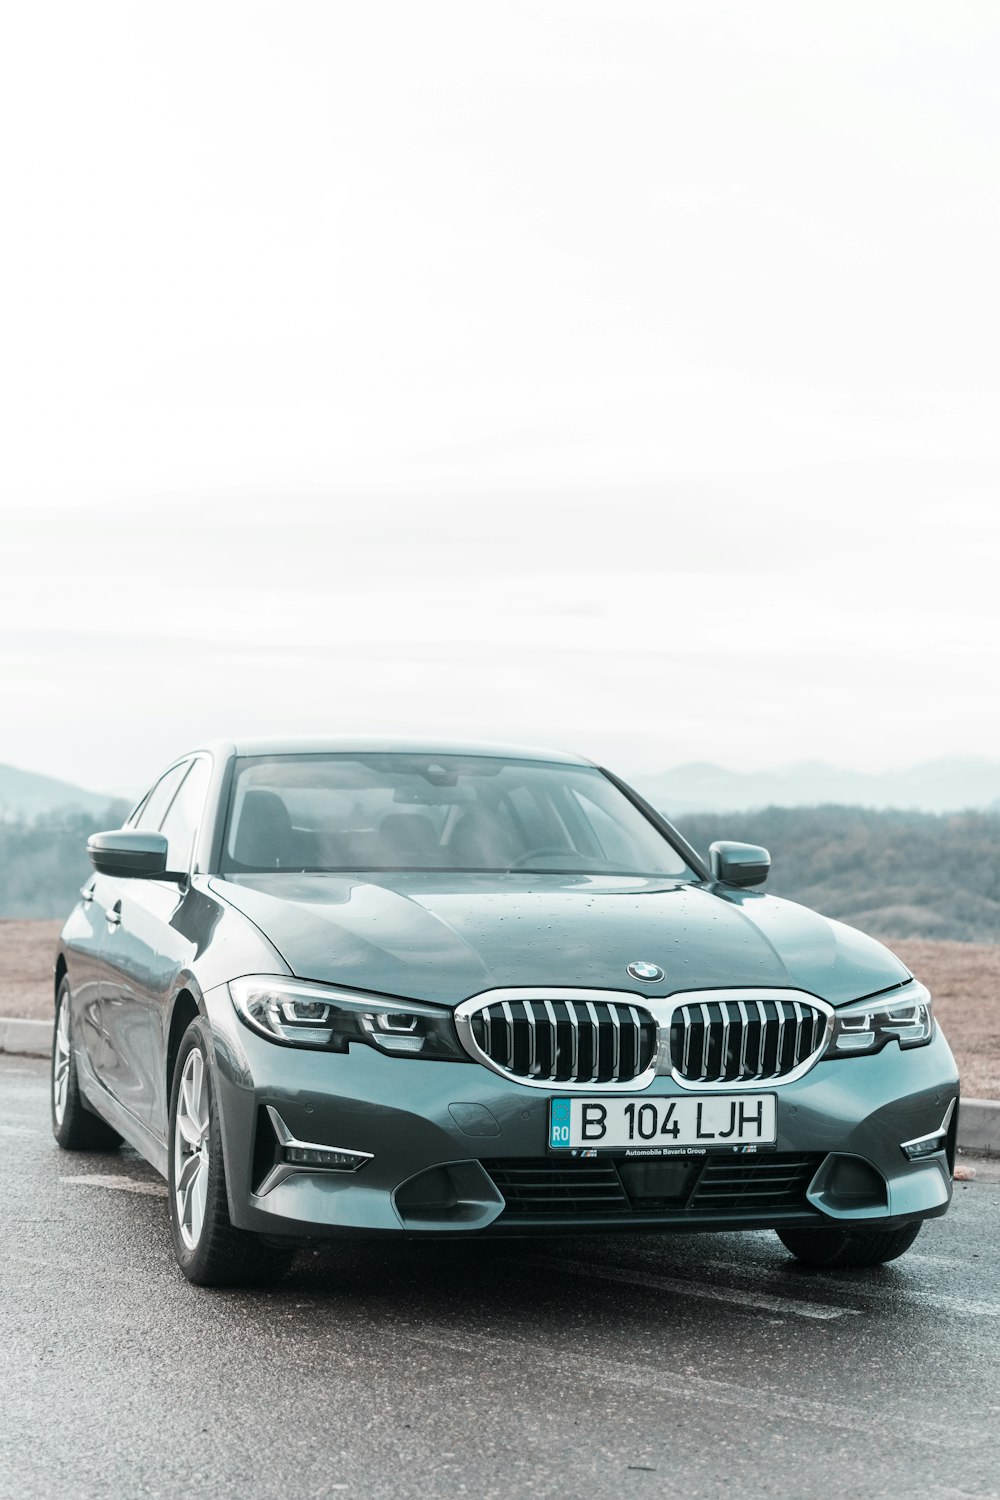 Bmw 3 Series Pictures  Download Free Images on Unsplash